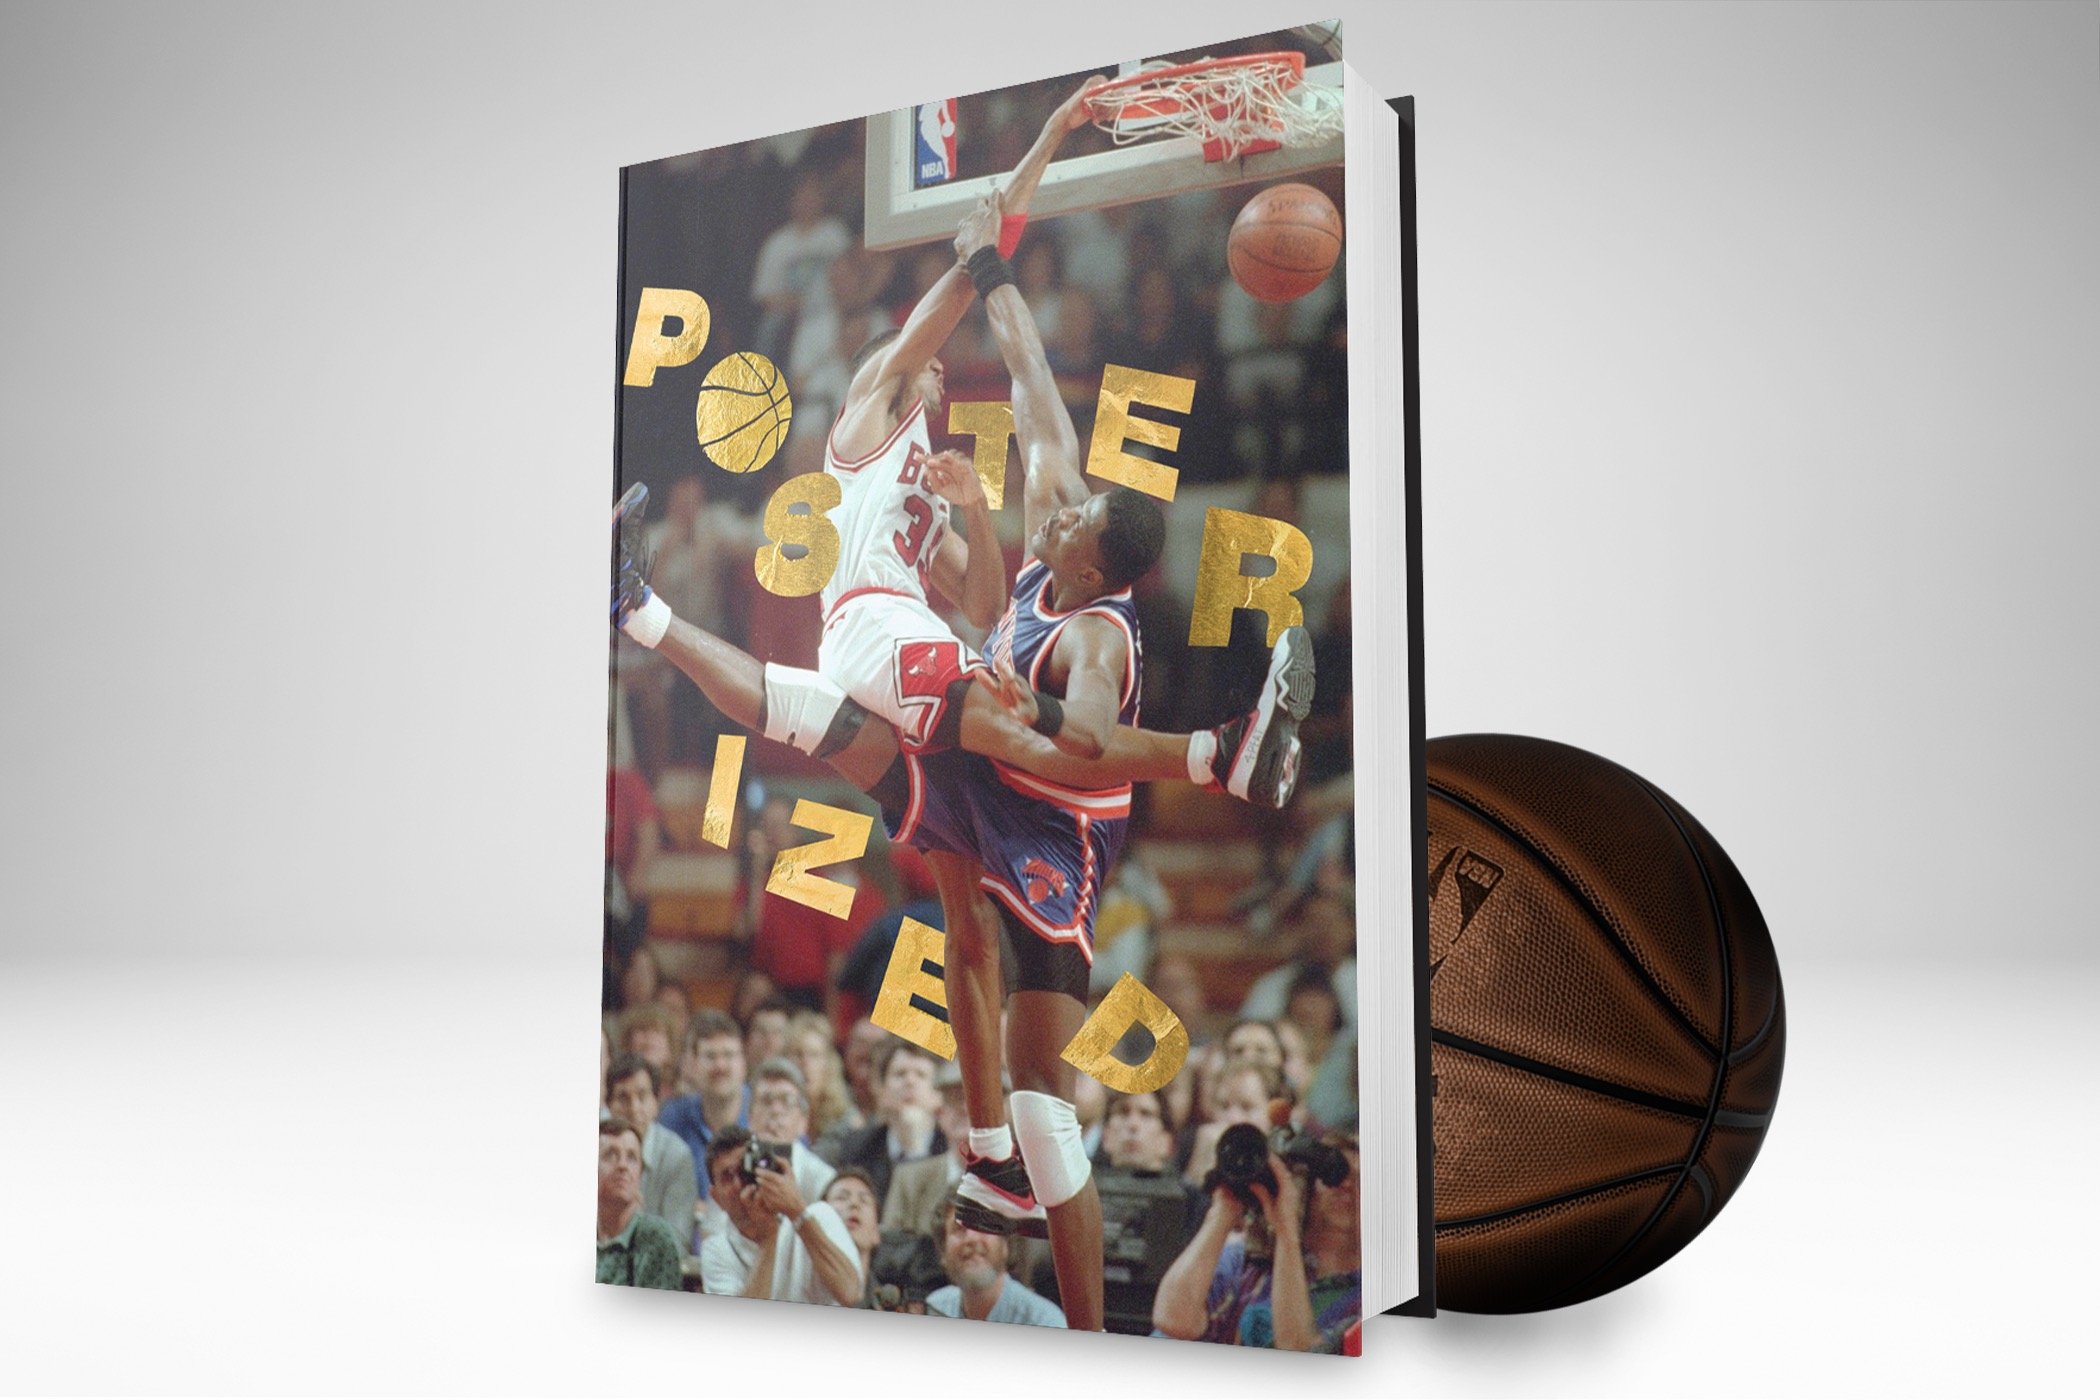 Book of Legendary Poster Dunks 'POSTERIZED' Release Info